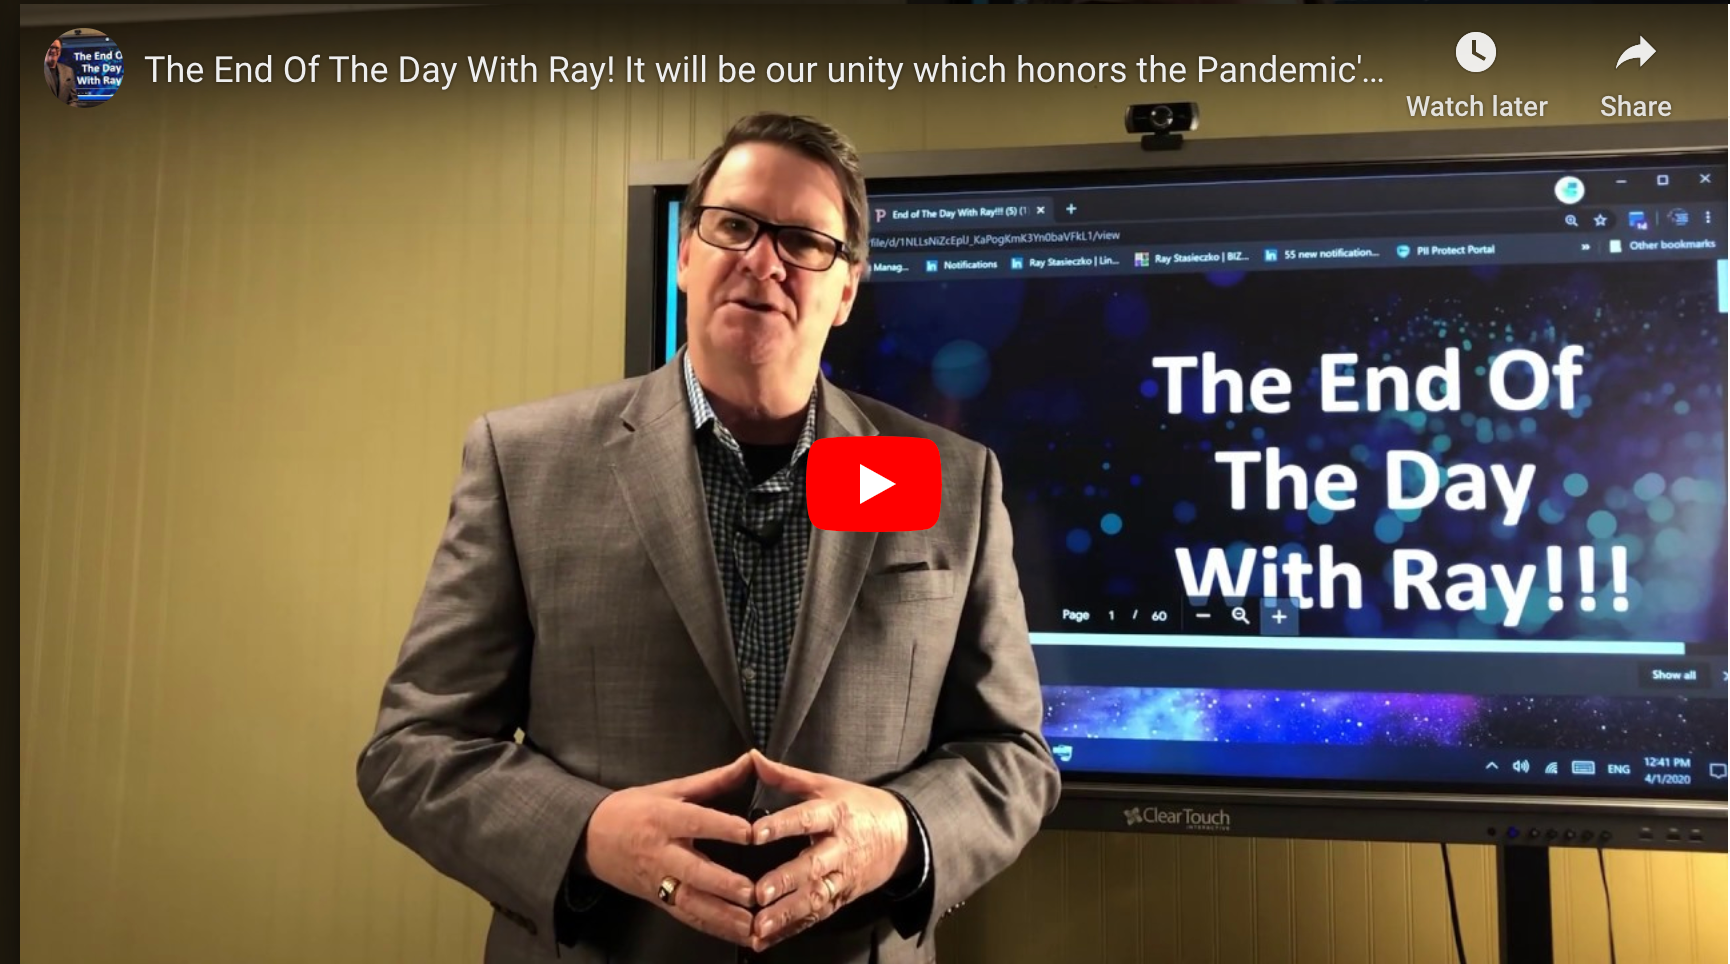 The End Of The Day With Ray! It will be our unity which honors the Pandemic's Victims.